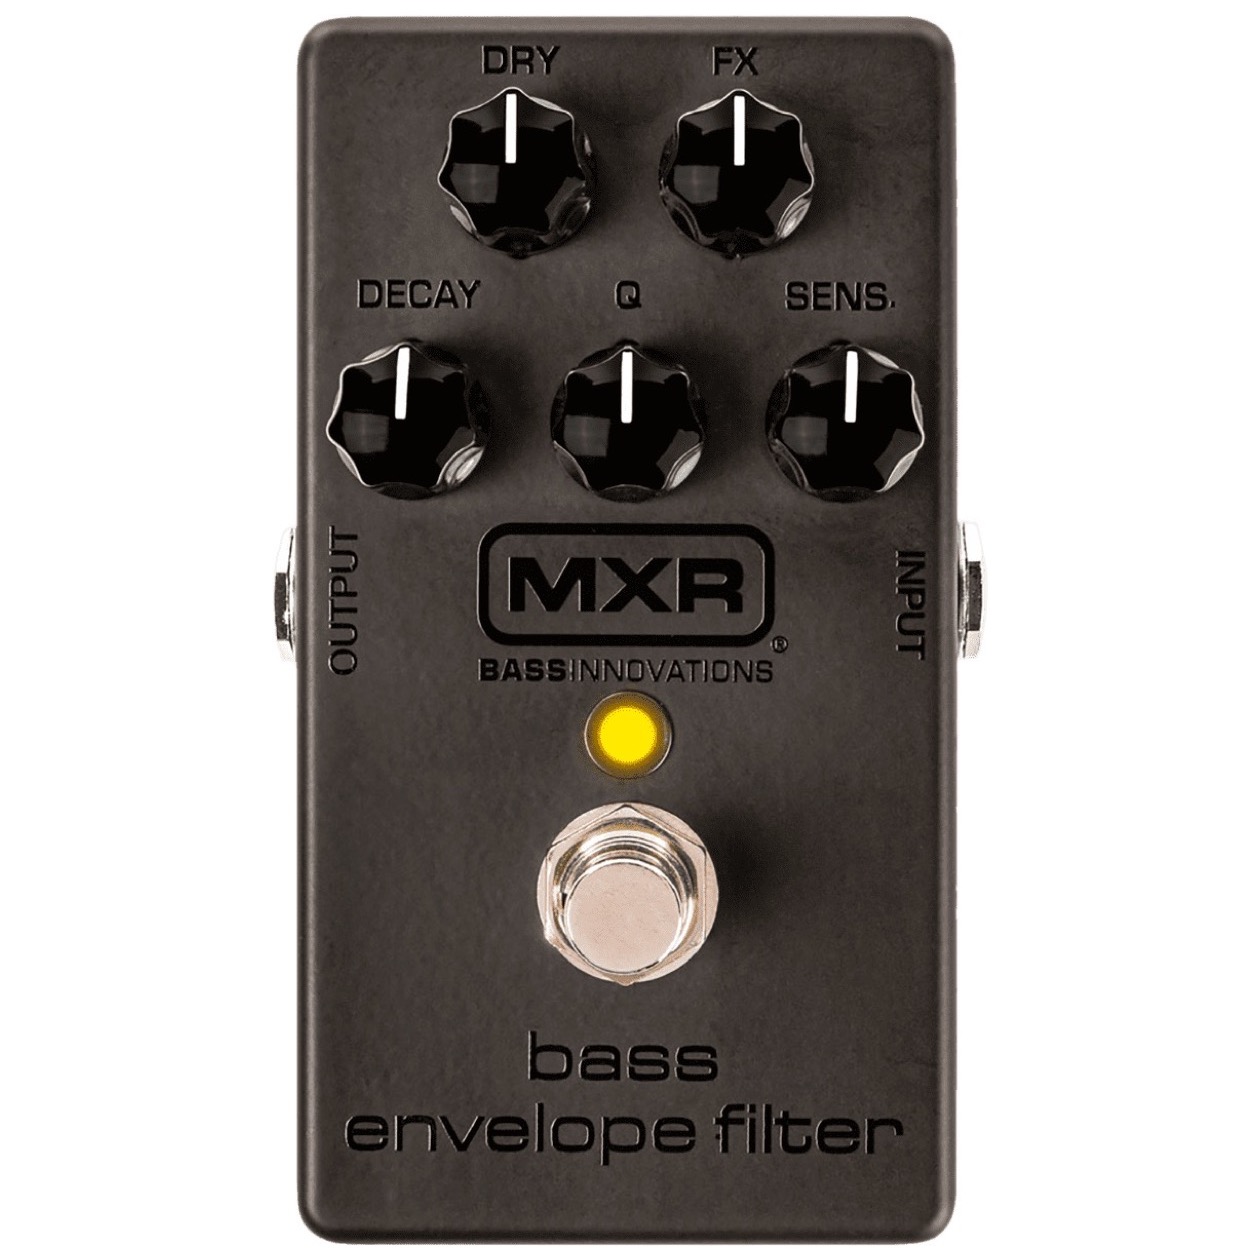 MXR M 82B / M82B Bass Enveloppe Filter Blackout Limited Edition Pedaal exclusief Adapter!